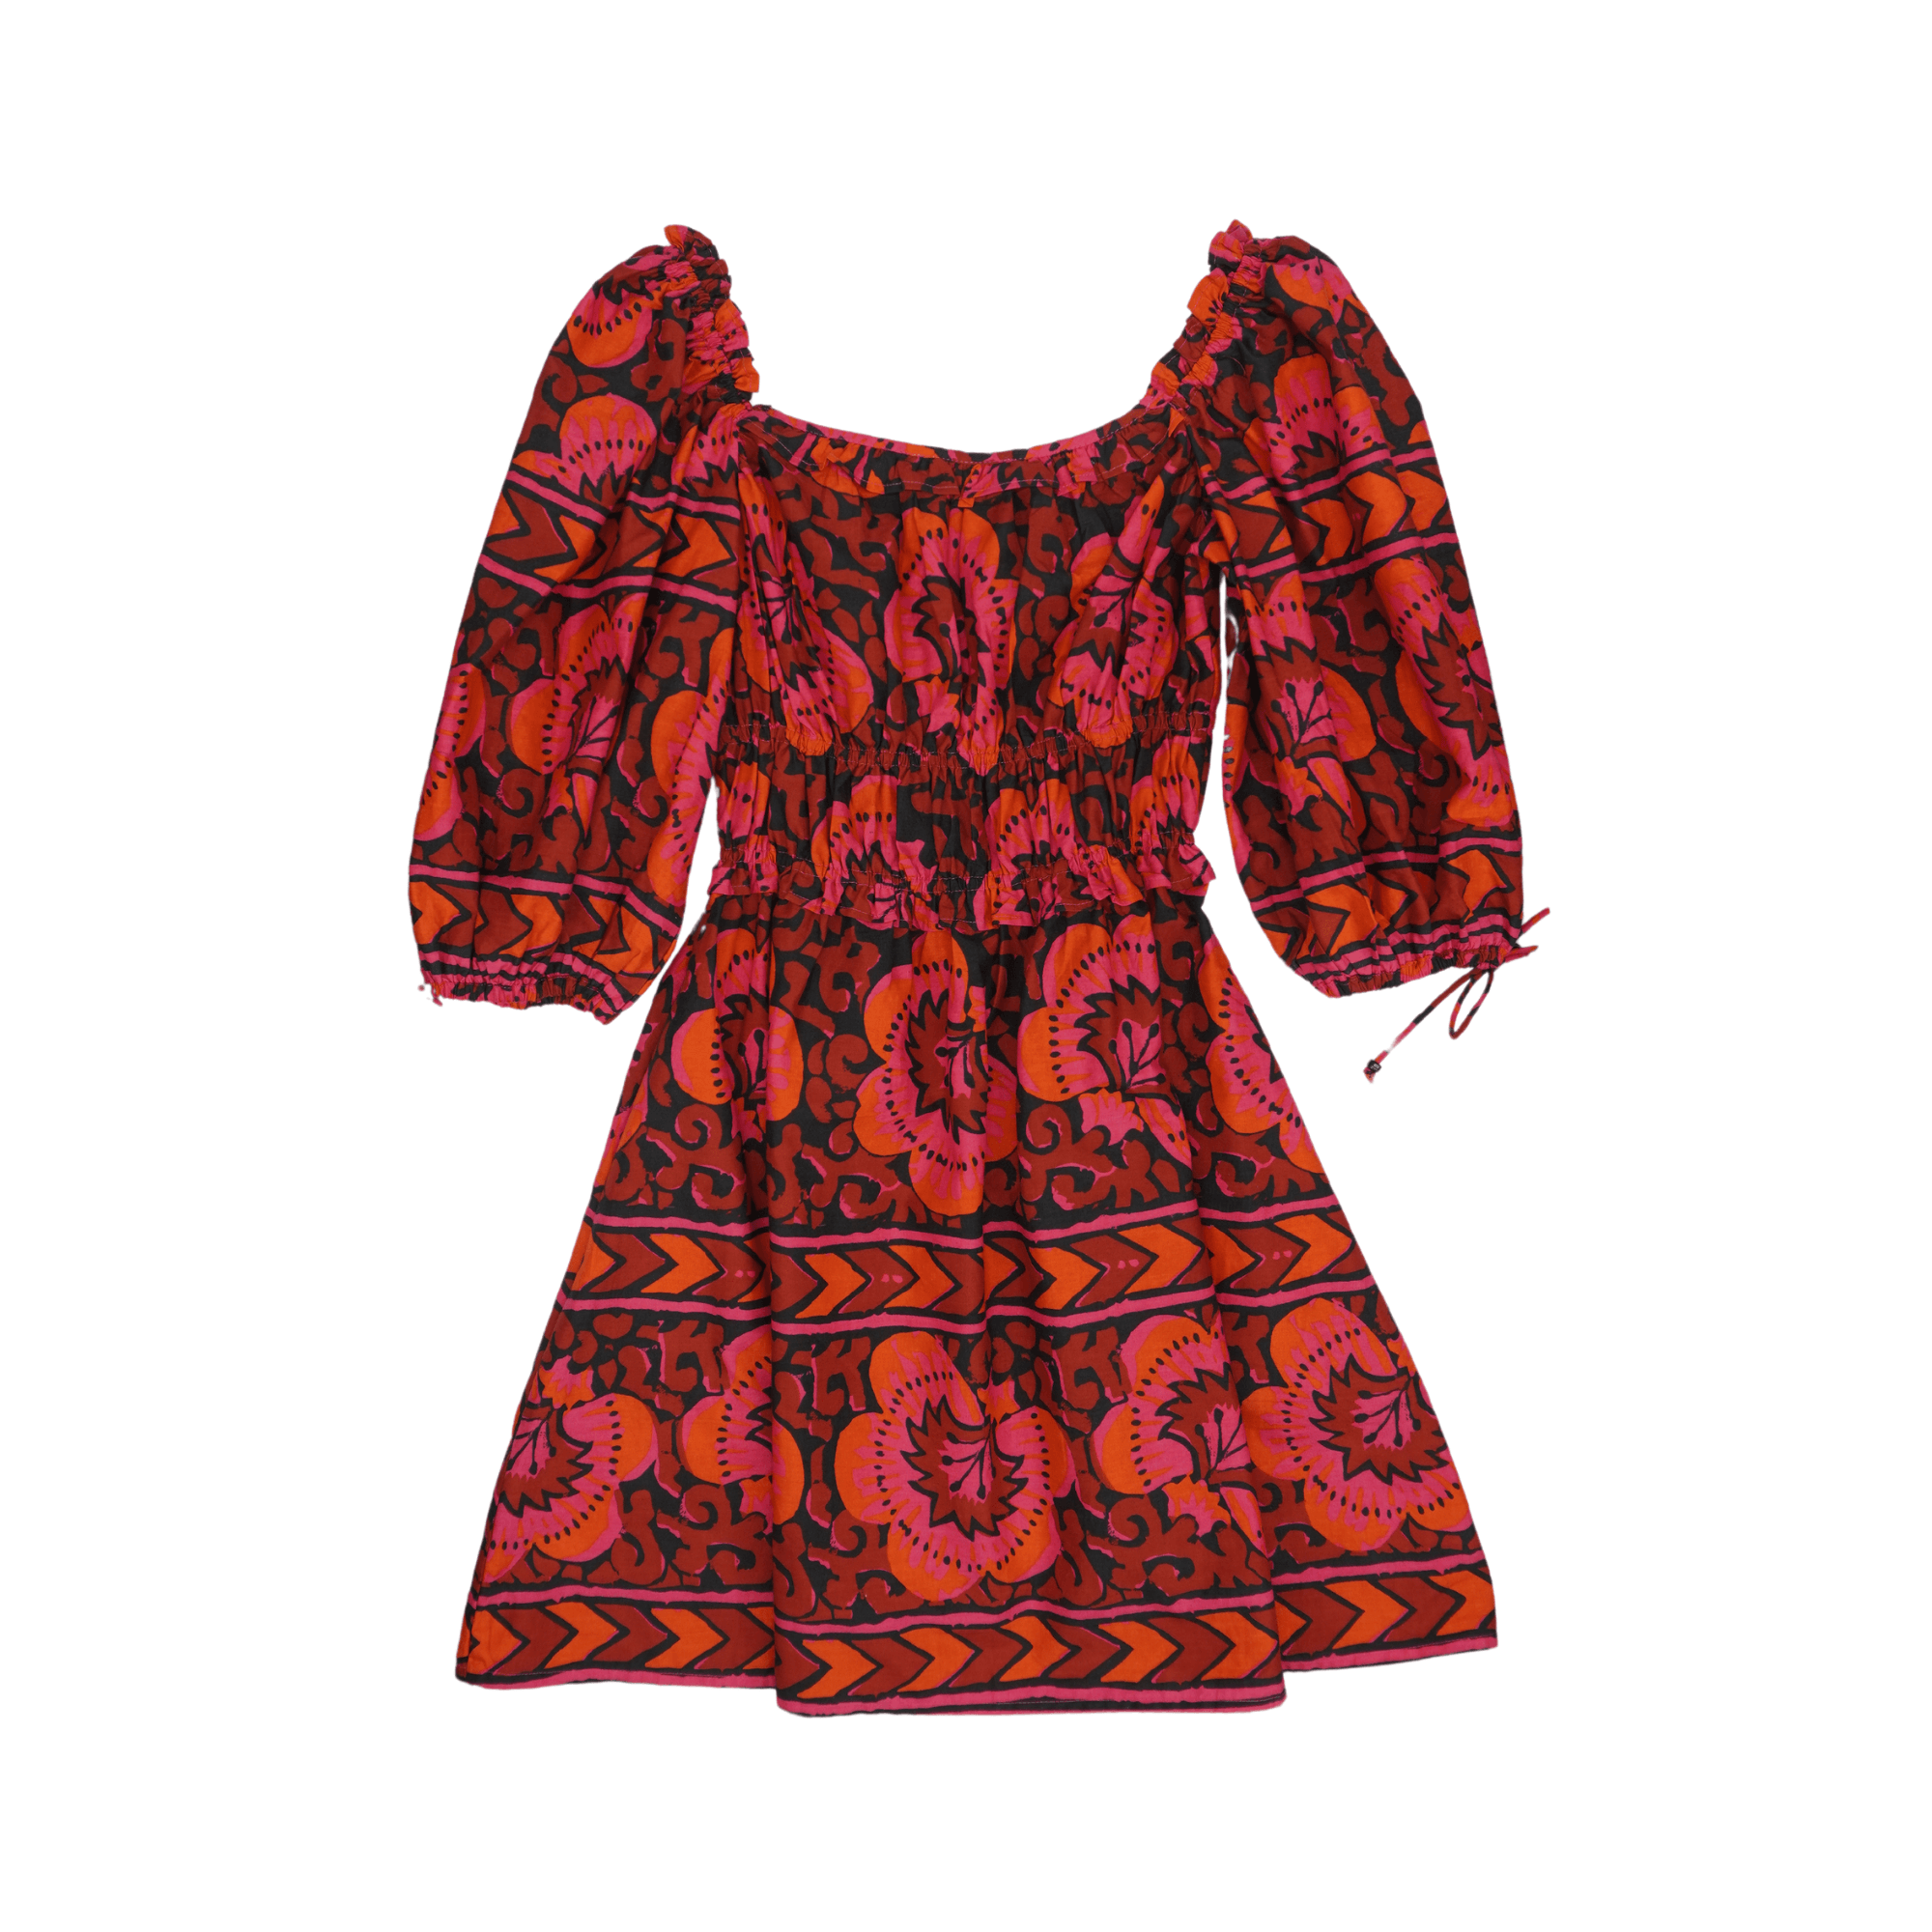 House of Harlow 'Shania' Dress - Women's S - Fashionably Yours